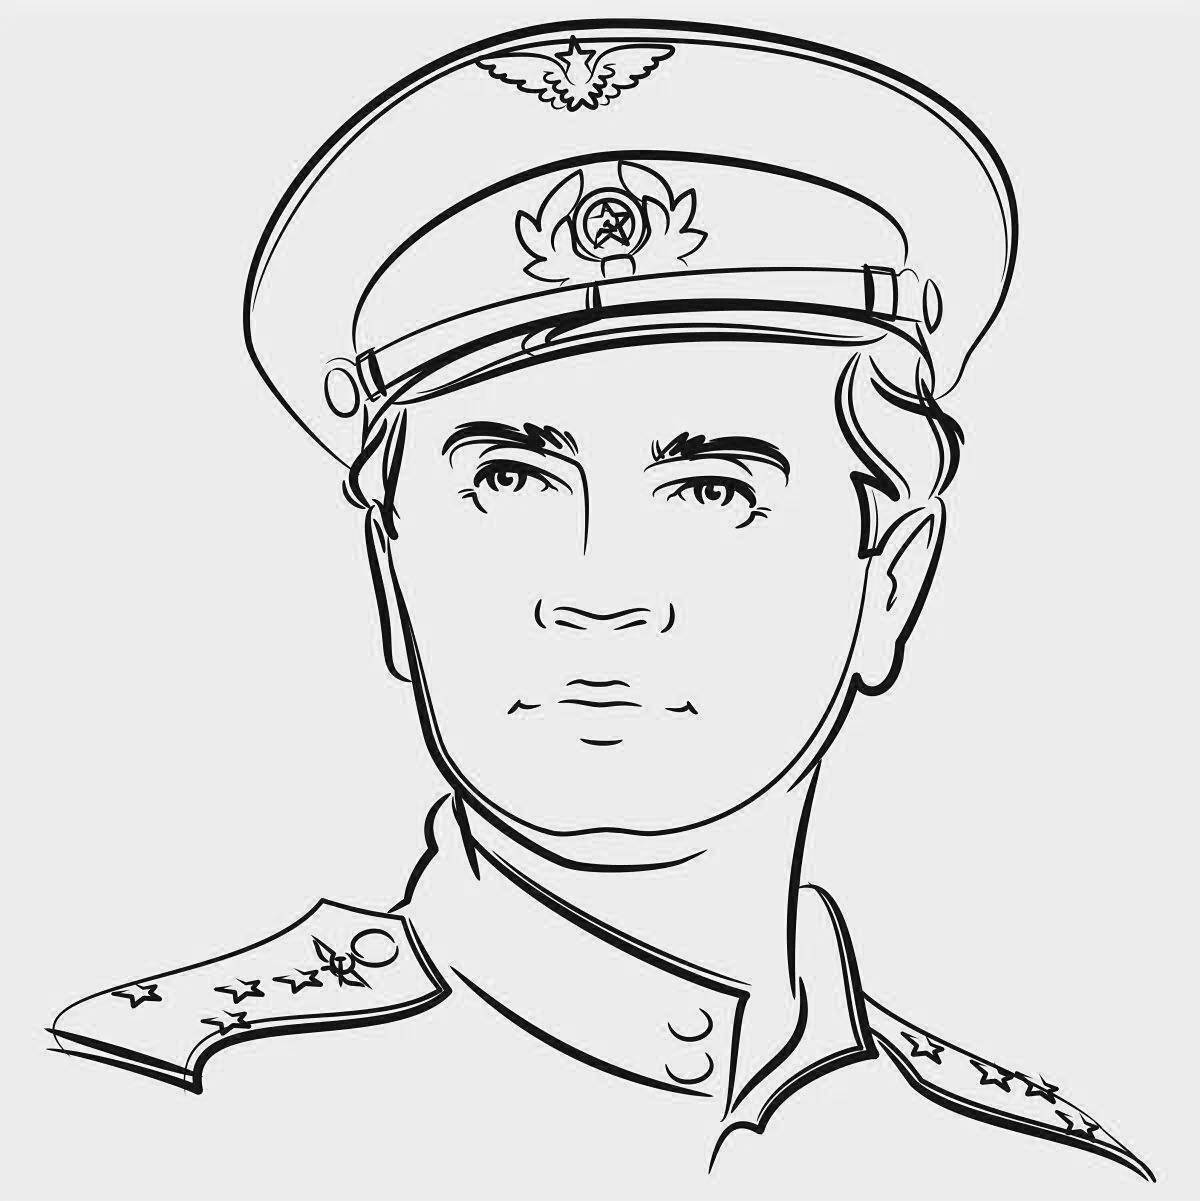 Glorious Soldier face coloring page